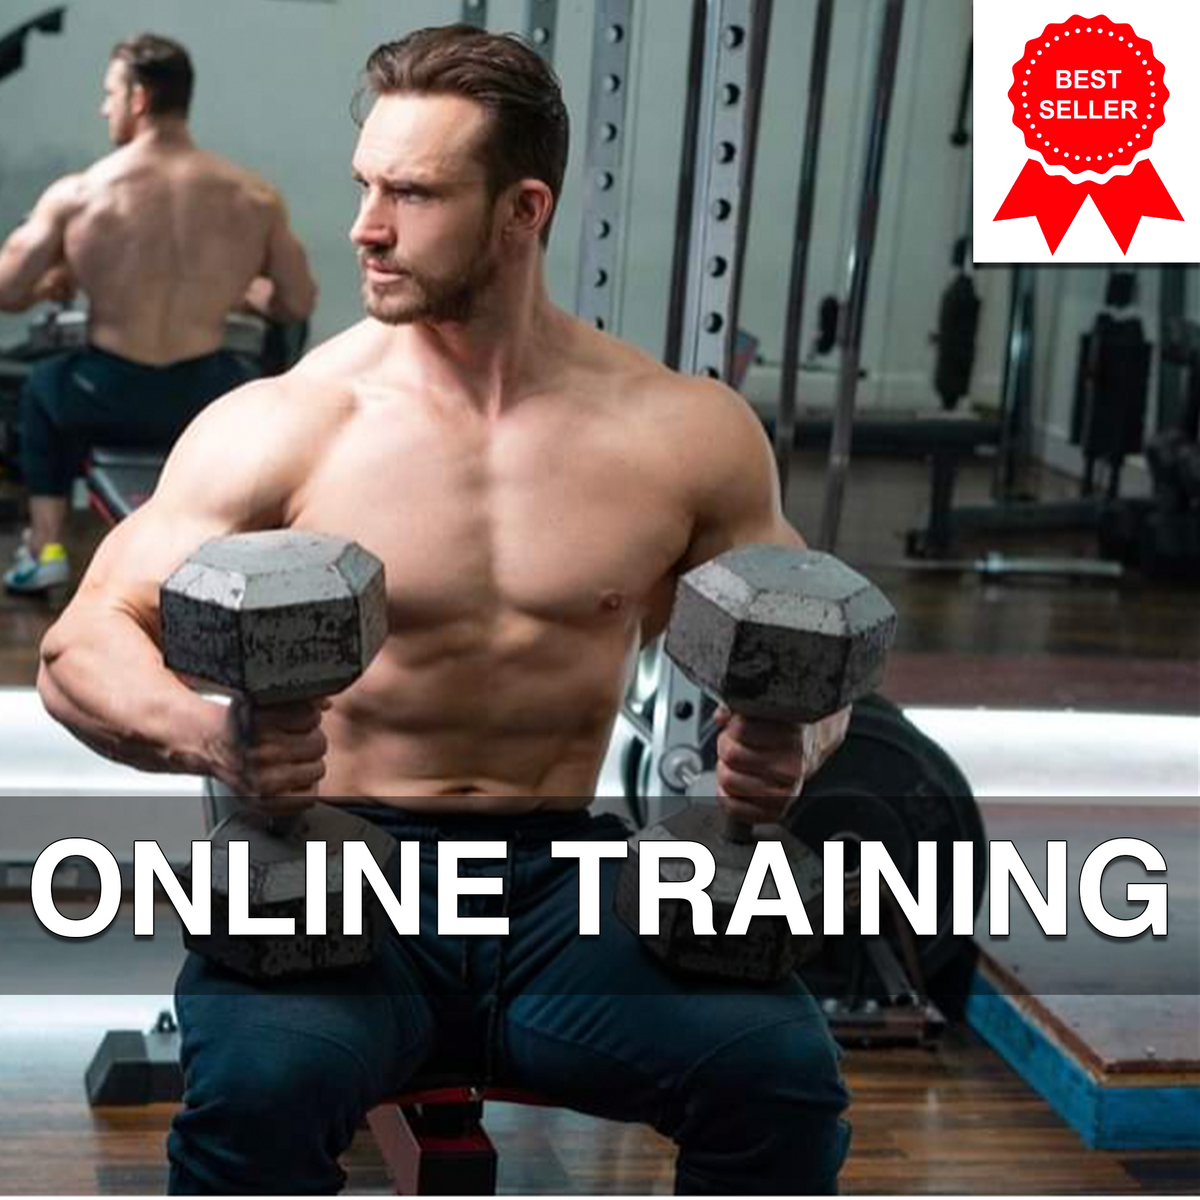 Online Personal Training As Low as $315.90/Month*